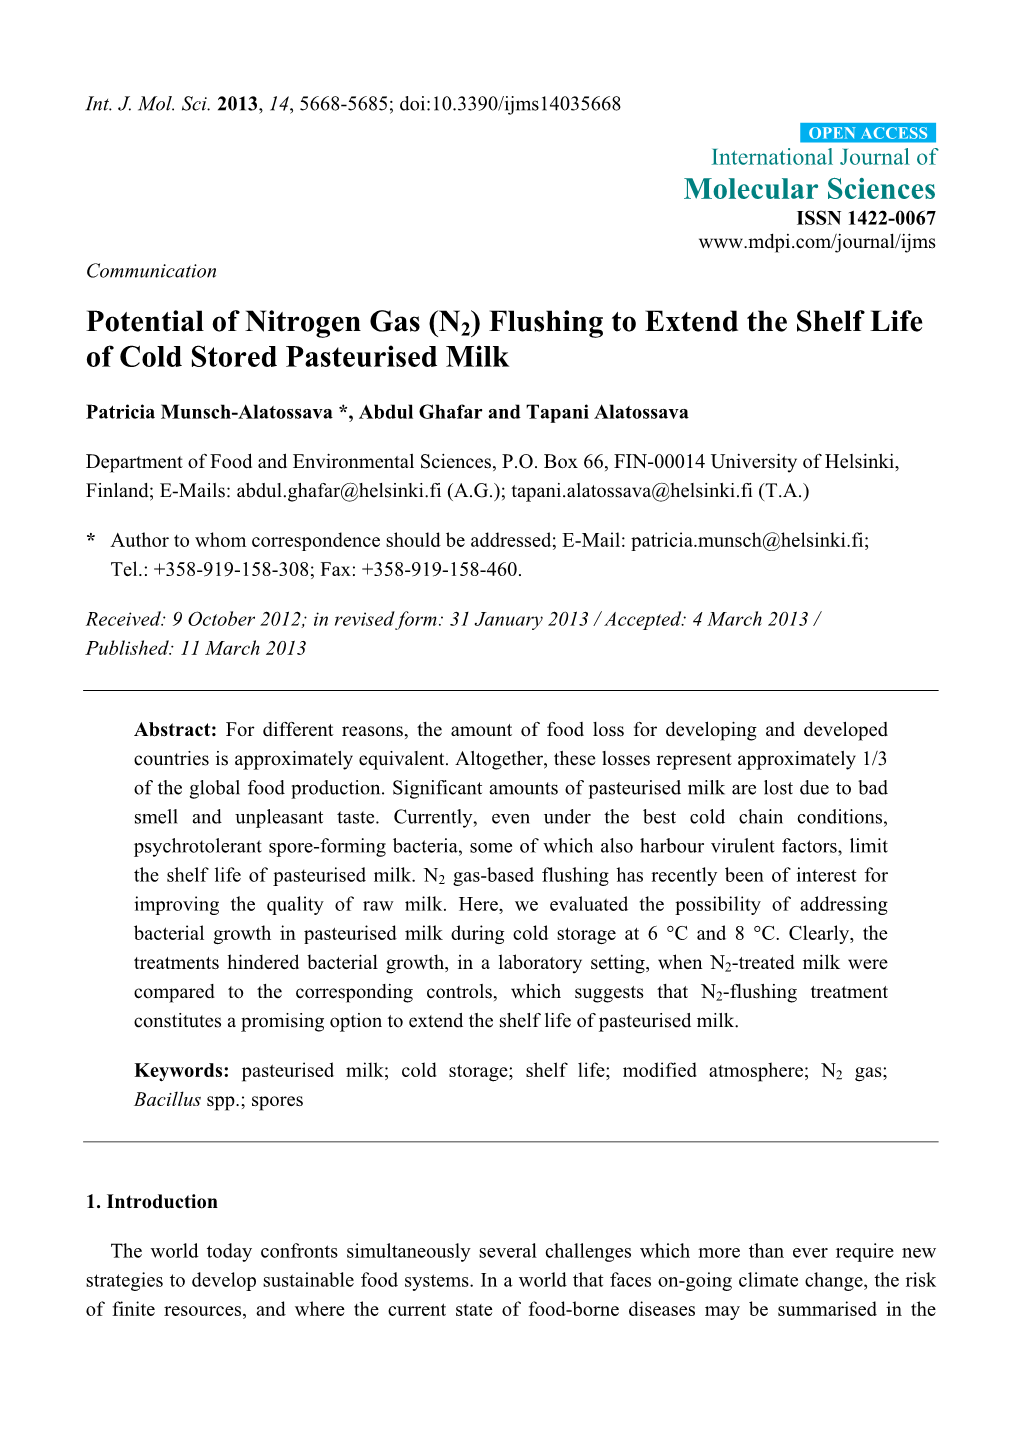 Potential of Nitrogen Gas (N2) Flushing to Extend the Shelf Life of Cold Stored Pasteurised Milk